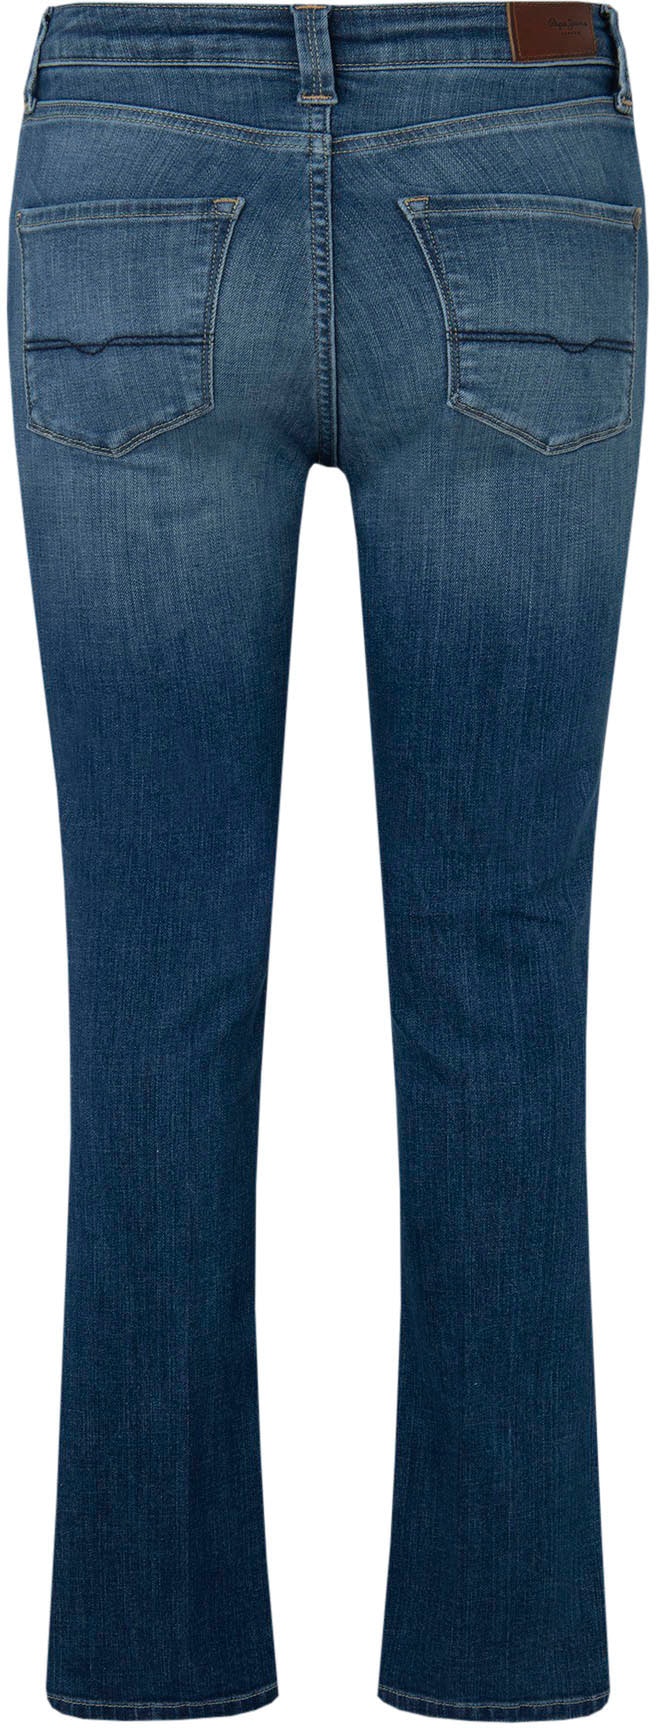 Pepe Jeans online »Dion Flare« kaufen Bootcut-Jeans